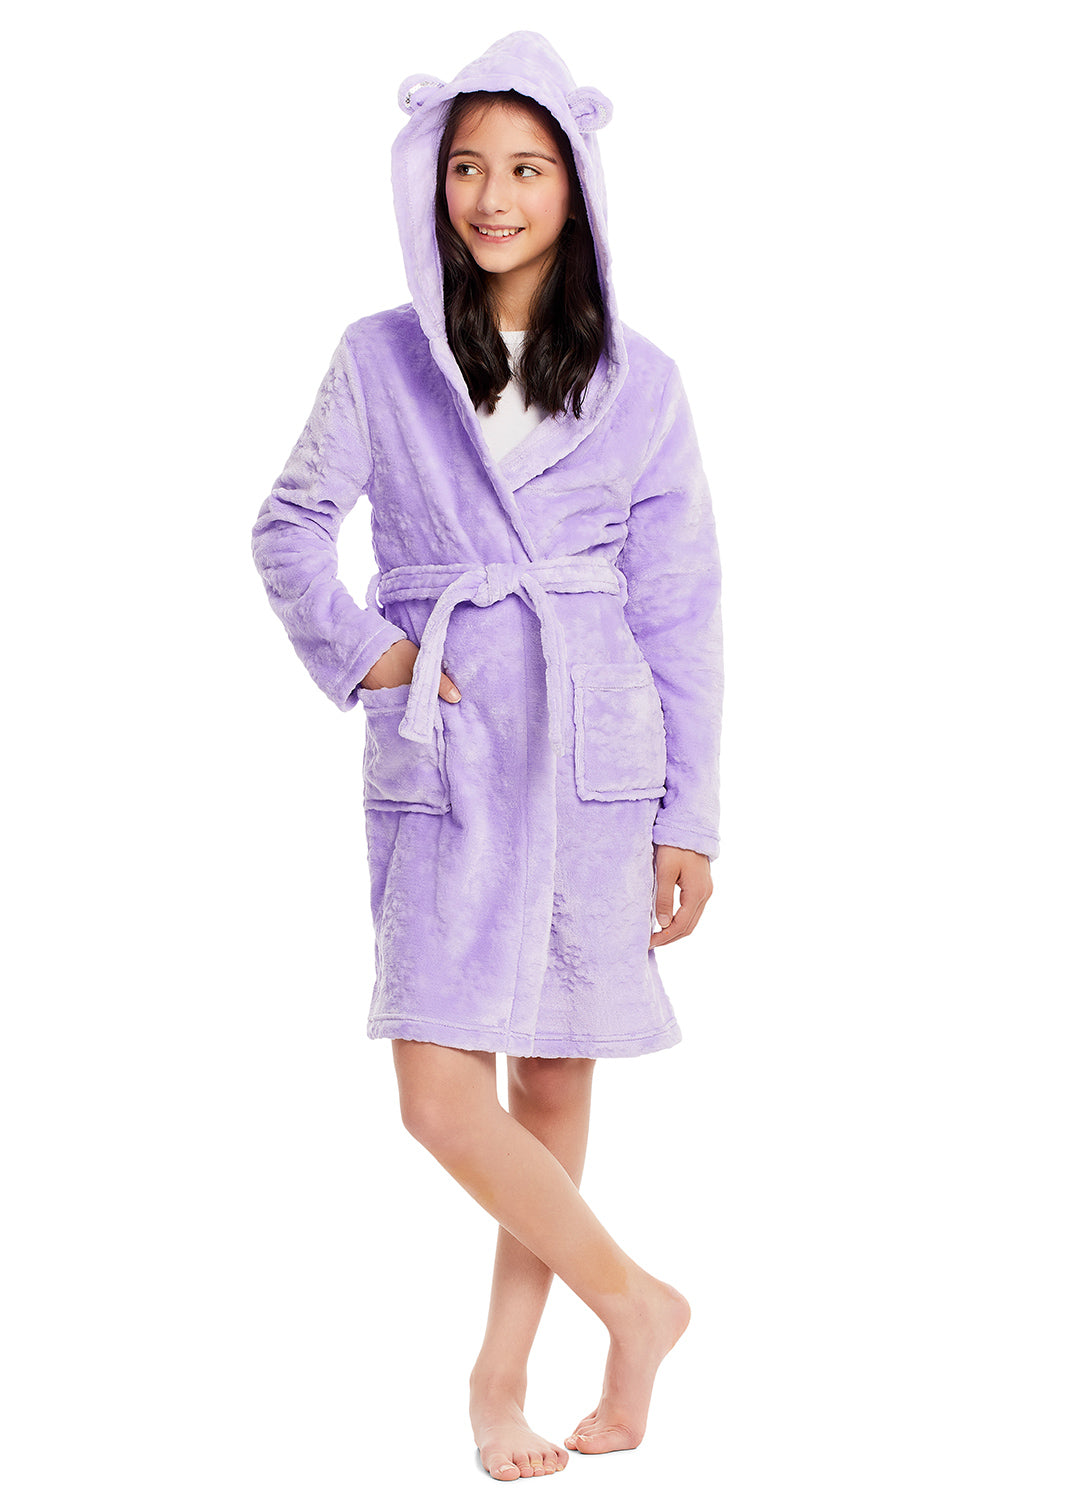 Girl wearing Lavender with Snowflakes Robe